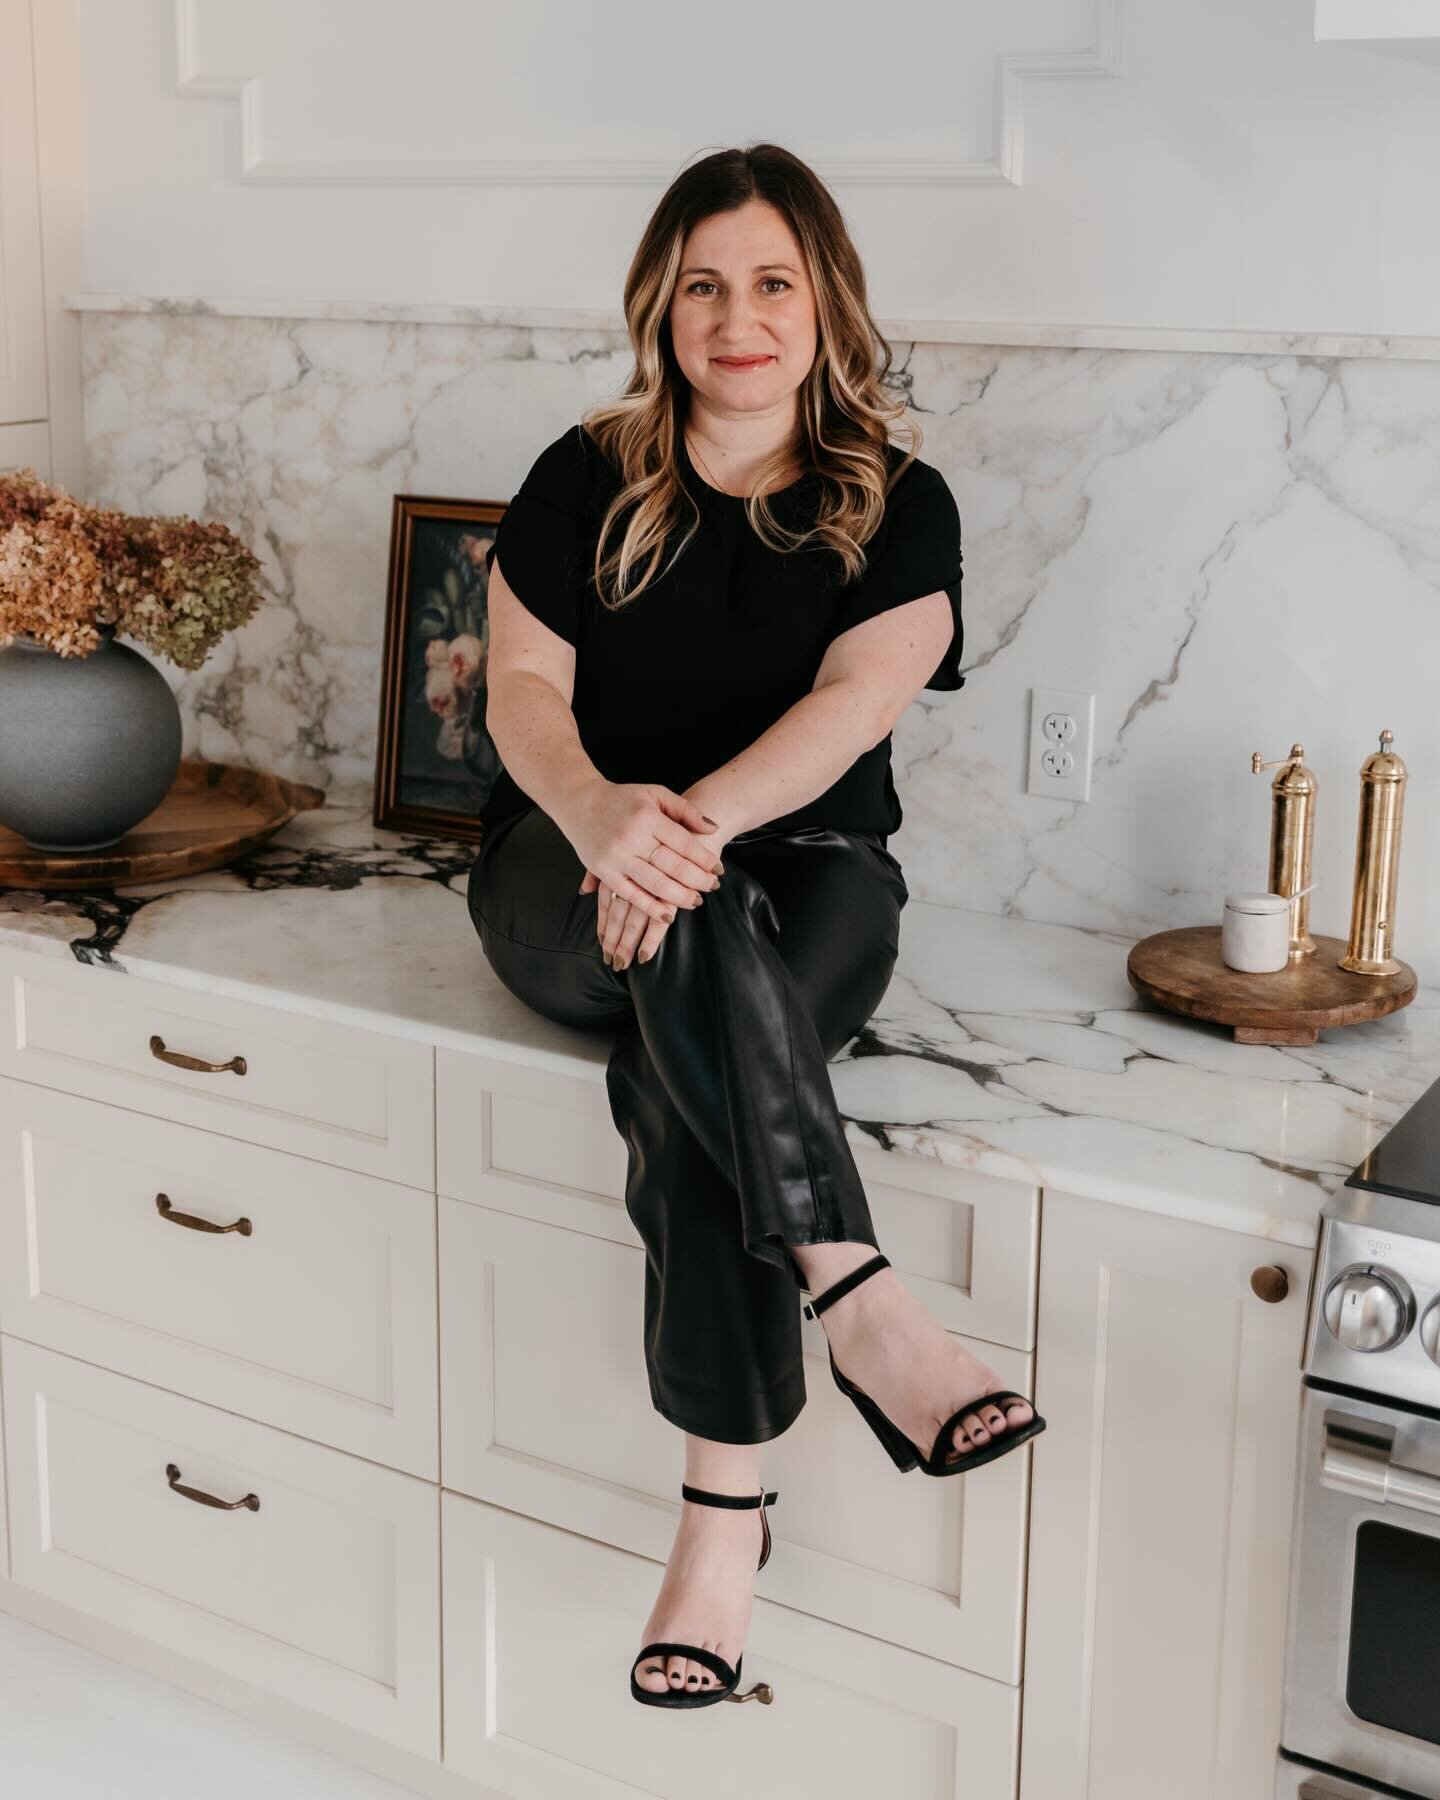 2023, our office expanded, re-branded &amp; refined so much we&rsquo;re officially due for a re-introduction! My name is Corina &amp; I&rsquo;m the founder &amp; principle designer at House of Helene. We&rsquo;re a full-service interior design studio